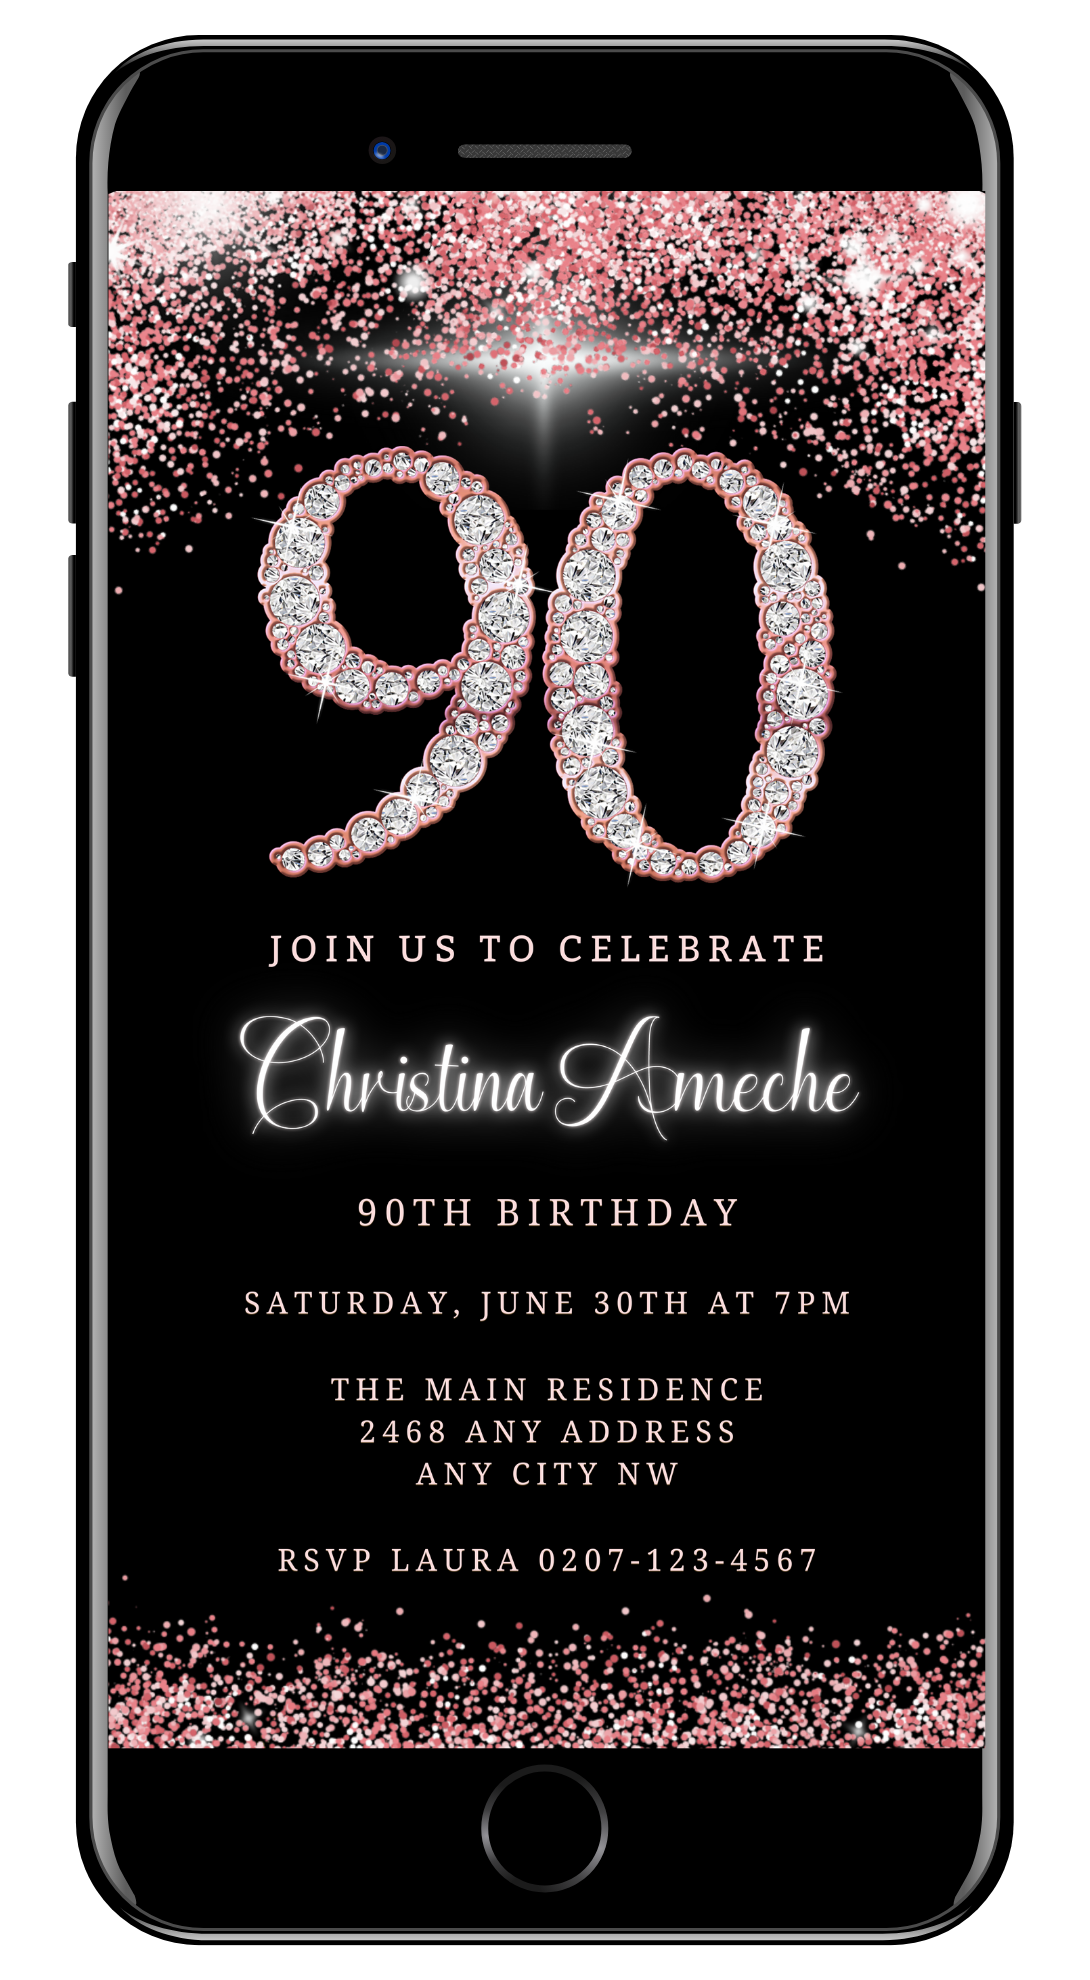 Customisable Rose Gold Diamond Glitter 90th Birthday Evite displayed on a smartphone screen with editable text and diamond accents, designed for easy personalization in Canva.